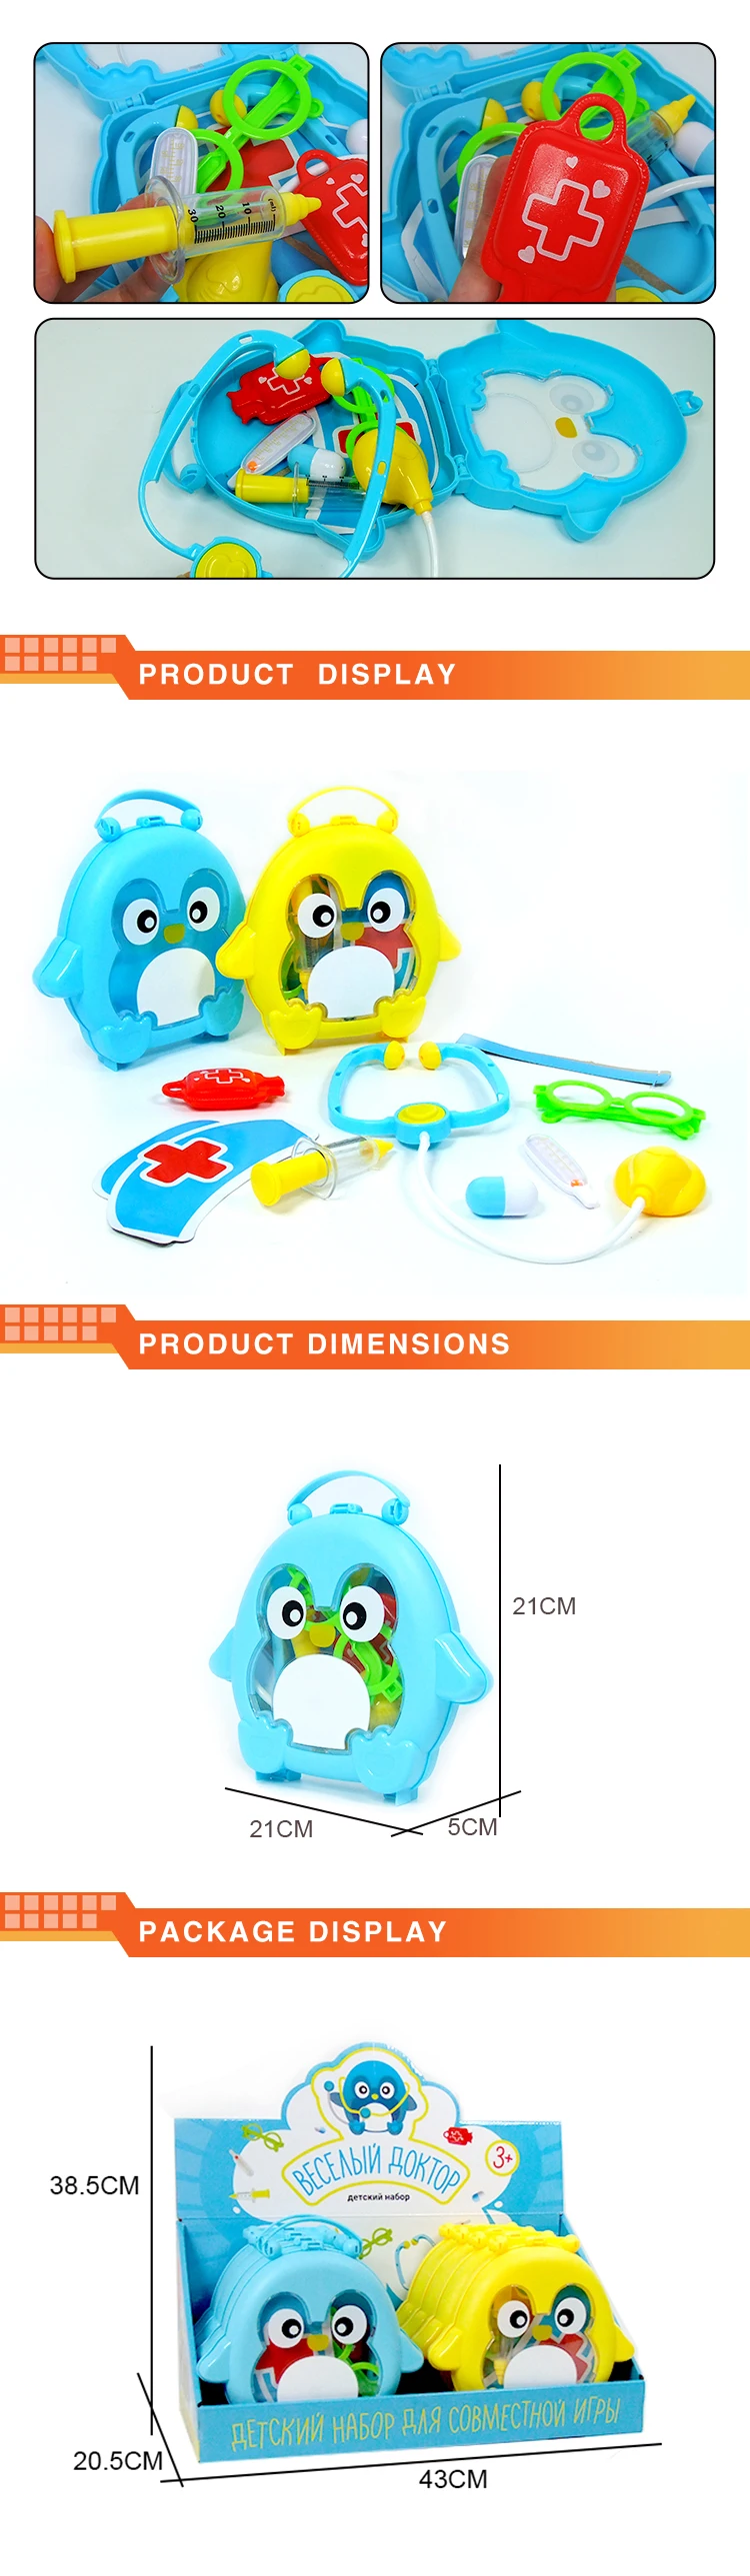 New arrival children educational toy penguin shape doctor set toy pretend play